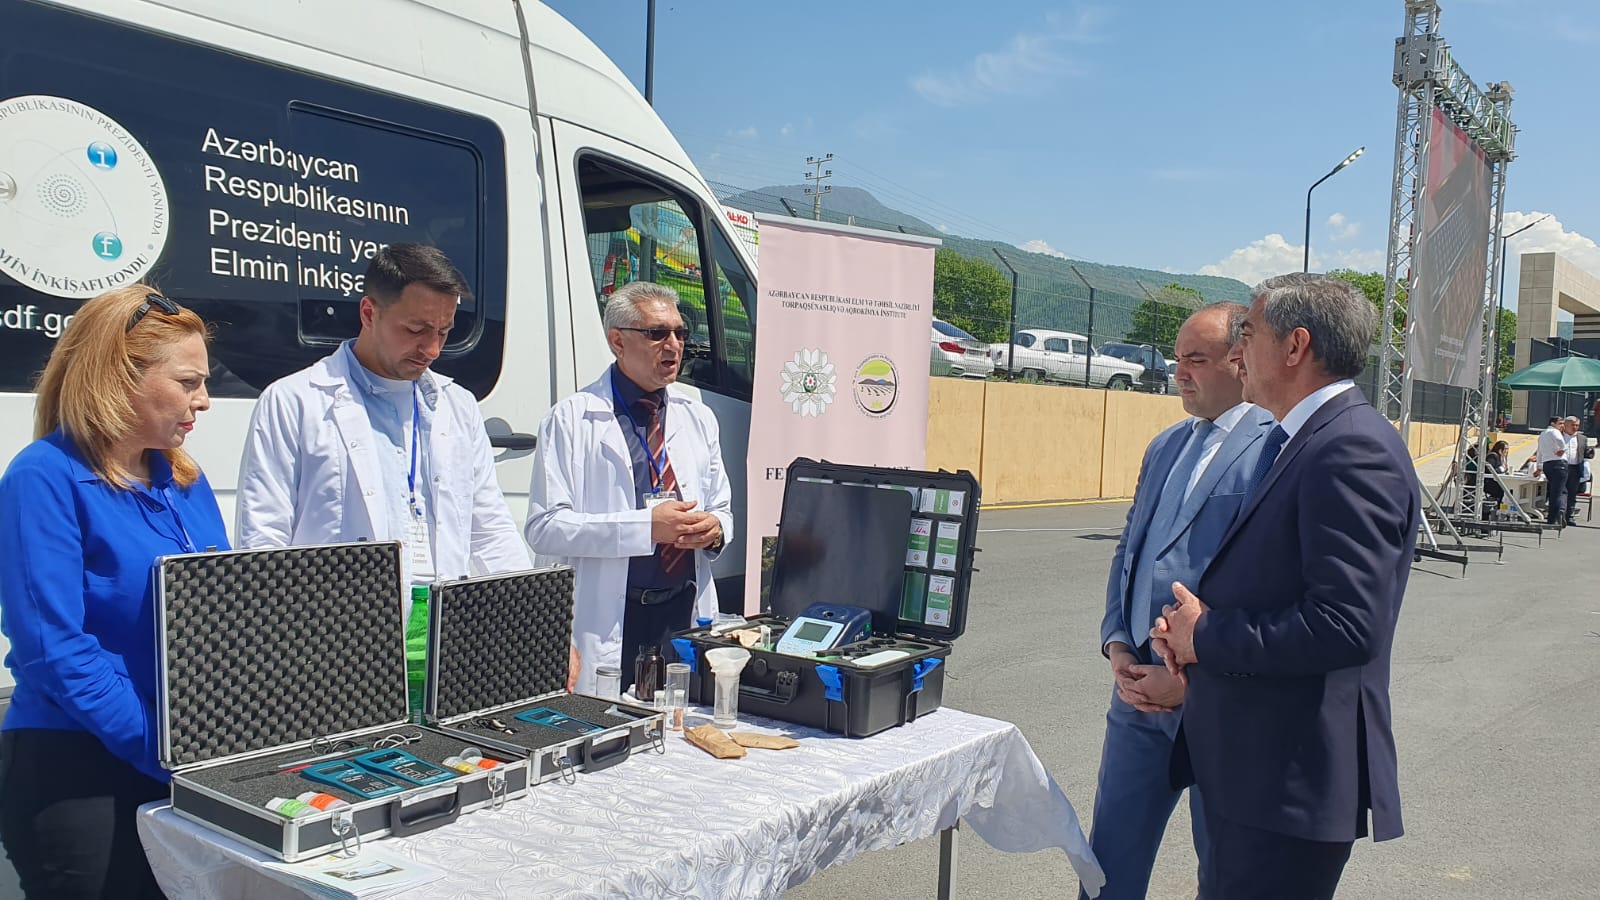 The Institute of Soil Science and Agro-chemistry participated in the Agrarian Innovation Festival held in Zagatala district.